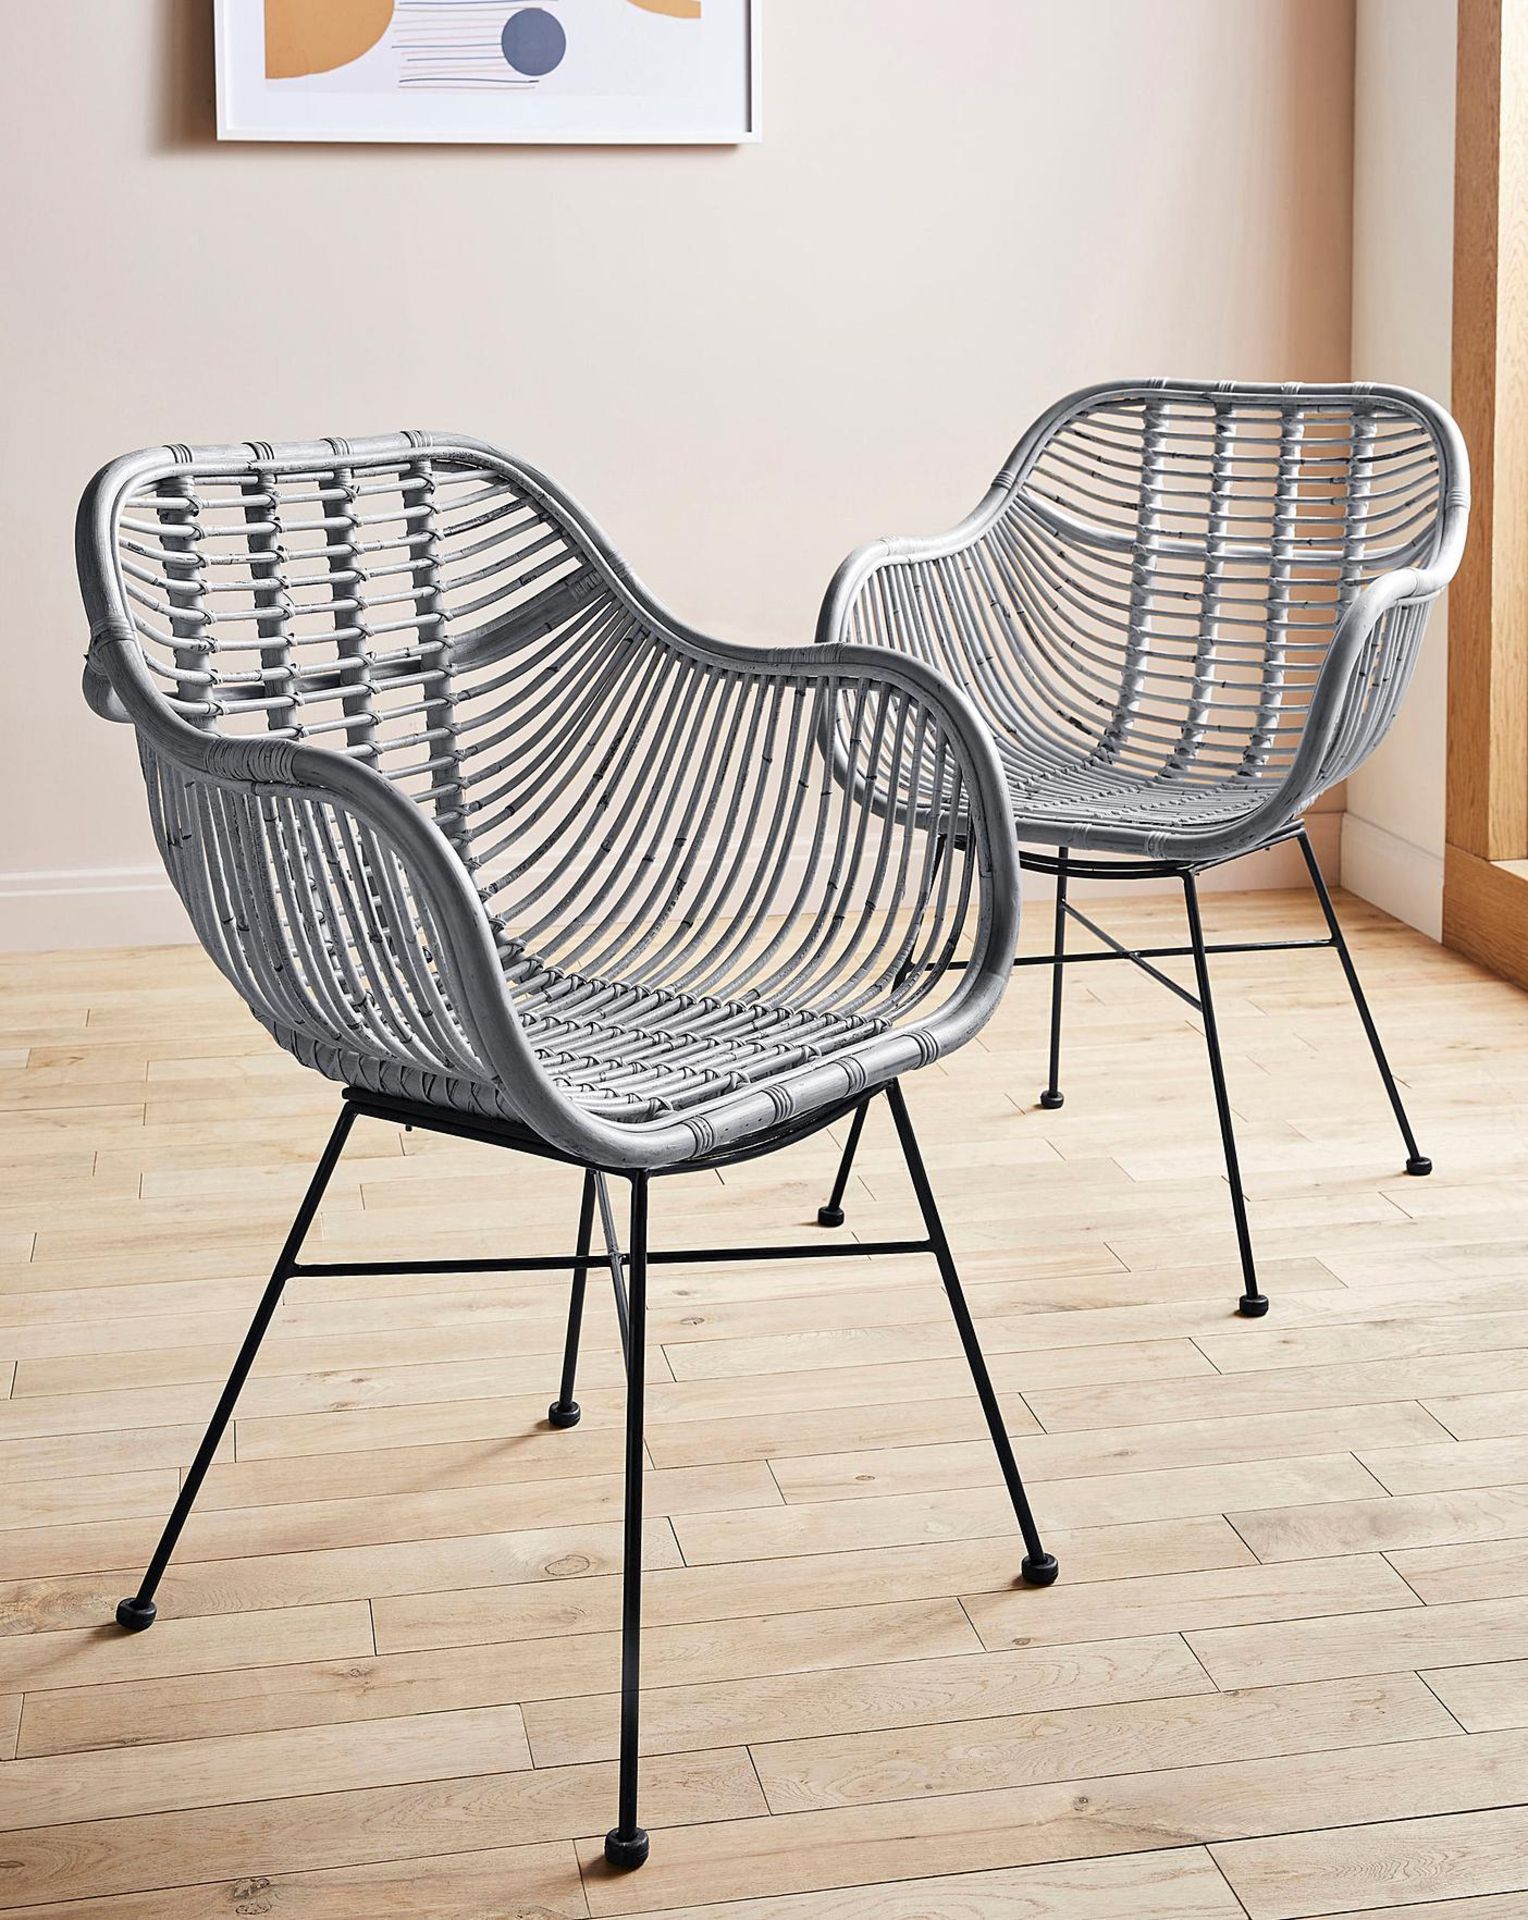 BRAND NEW SET OF 2 EMILIO RATTAN DINING CHAIRS RRP £279 PER SET, Crafted from natural rattan,